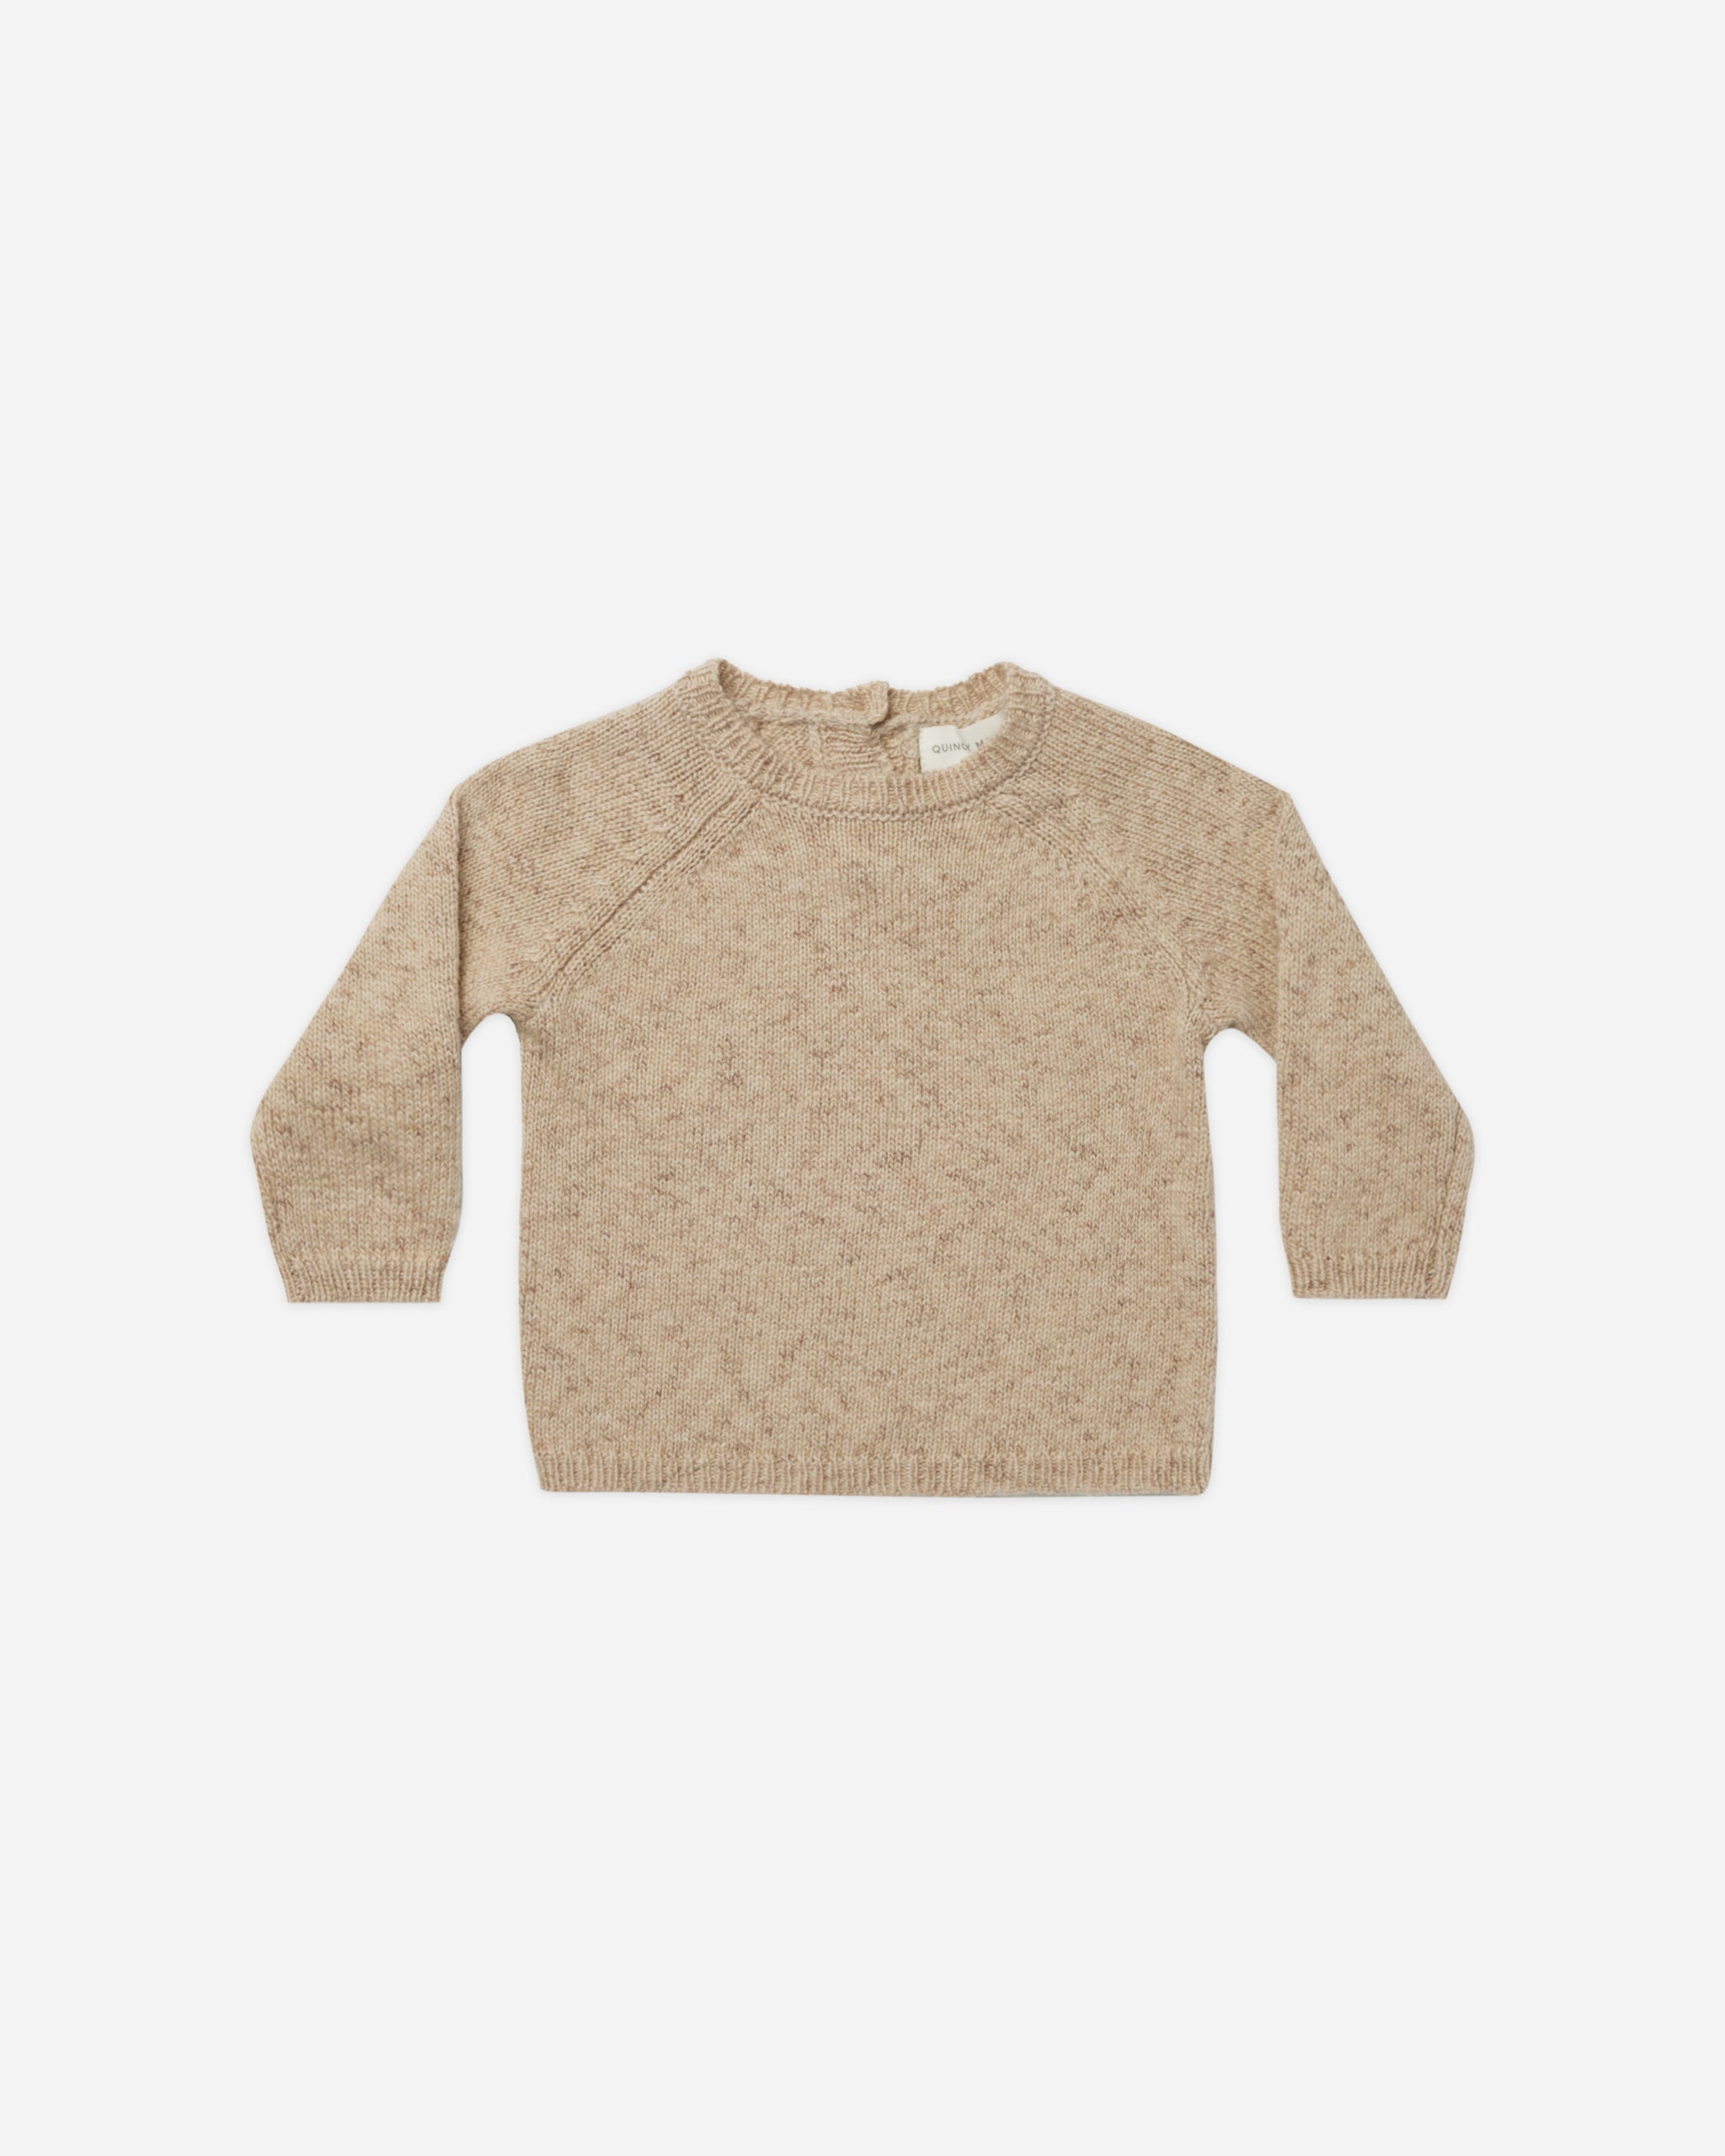 Knit Sweater || Latte Speckled - Rylee + Cru | Kids Clothes | Trendy Baby Clothes | Modern Infant Outfits |